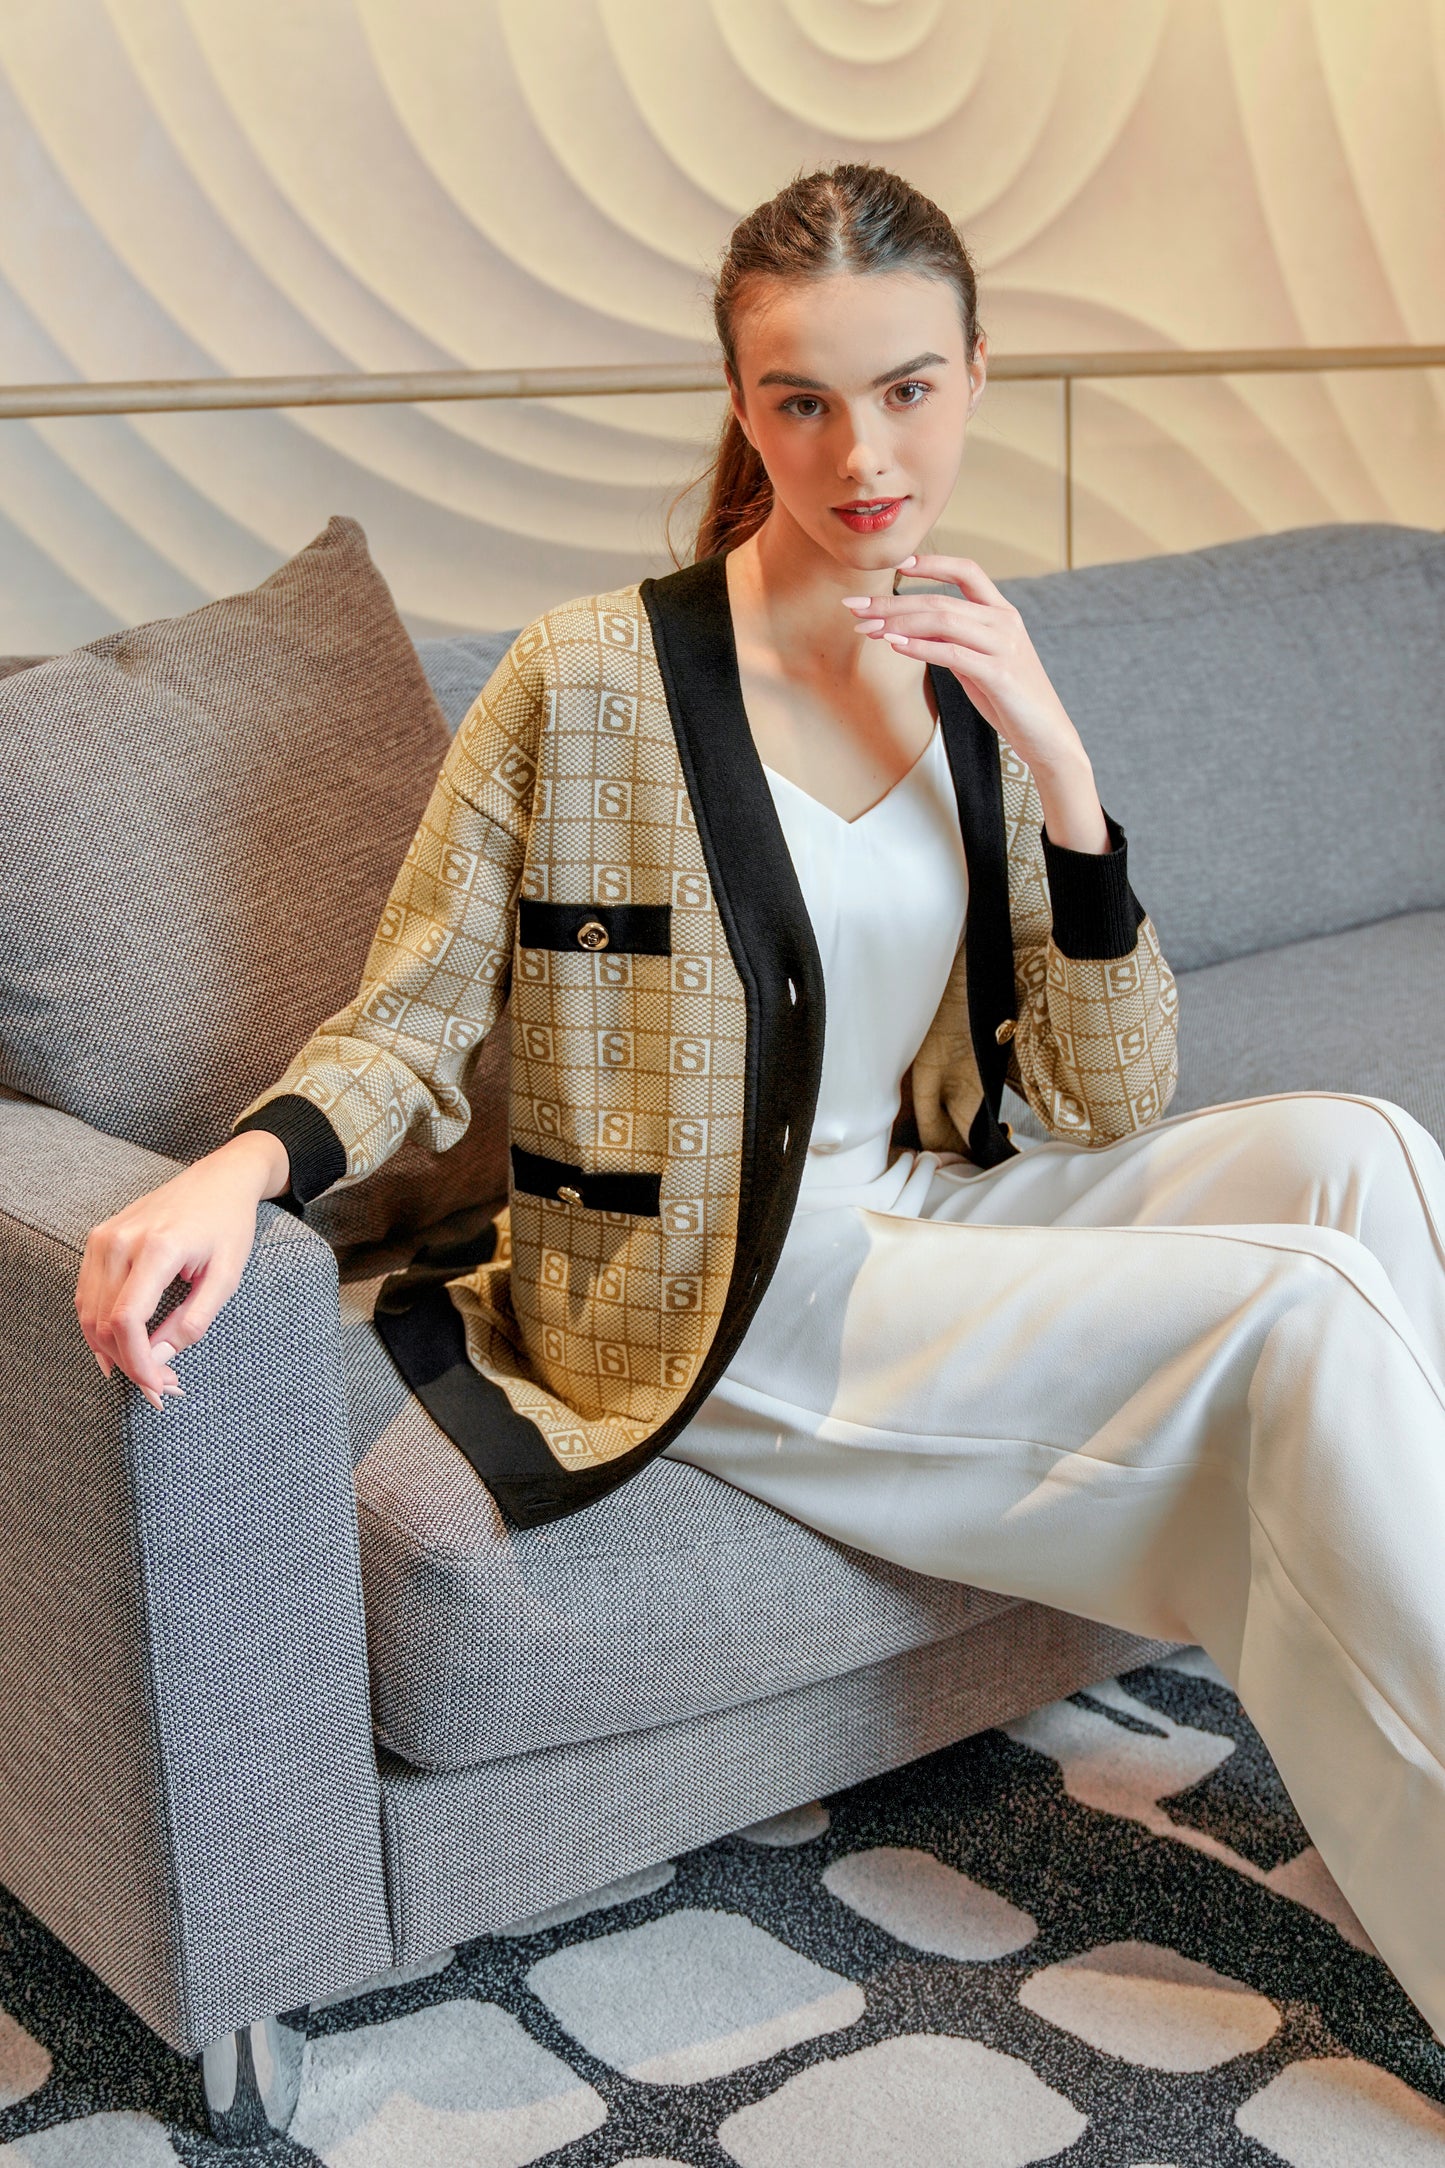 Plaid Outer - Brown